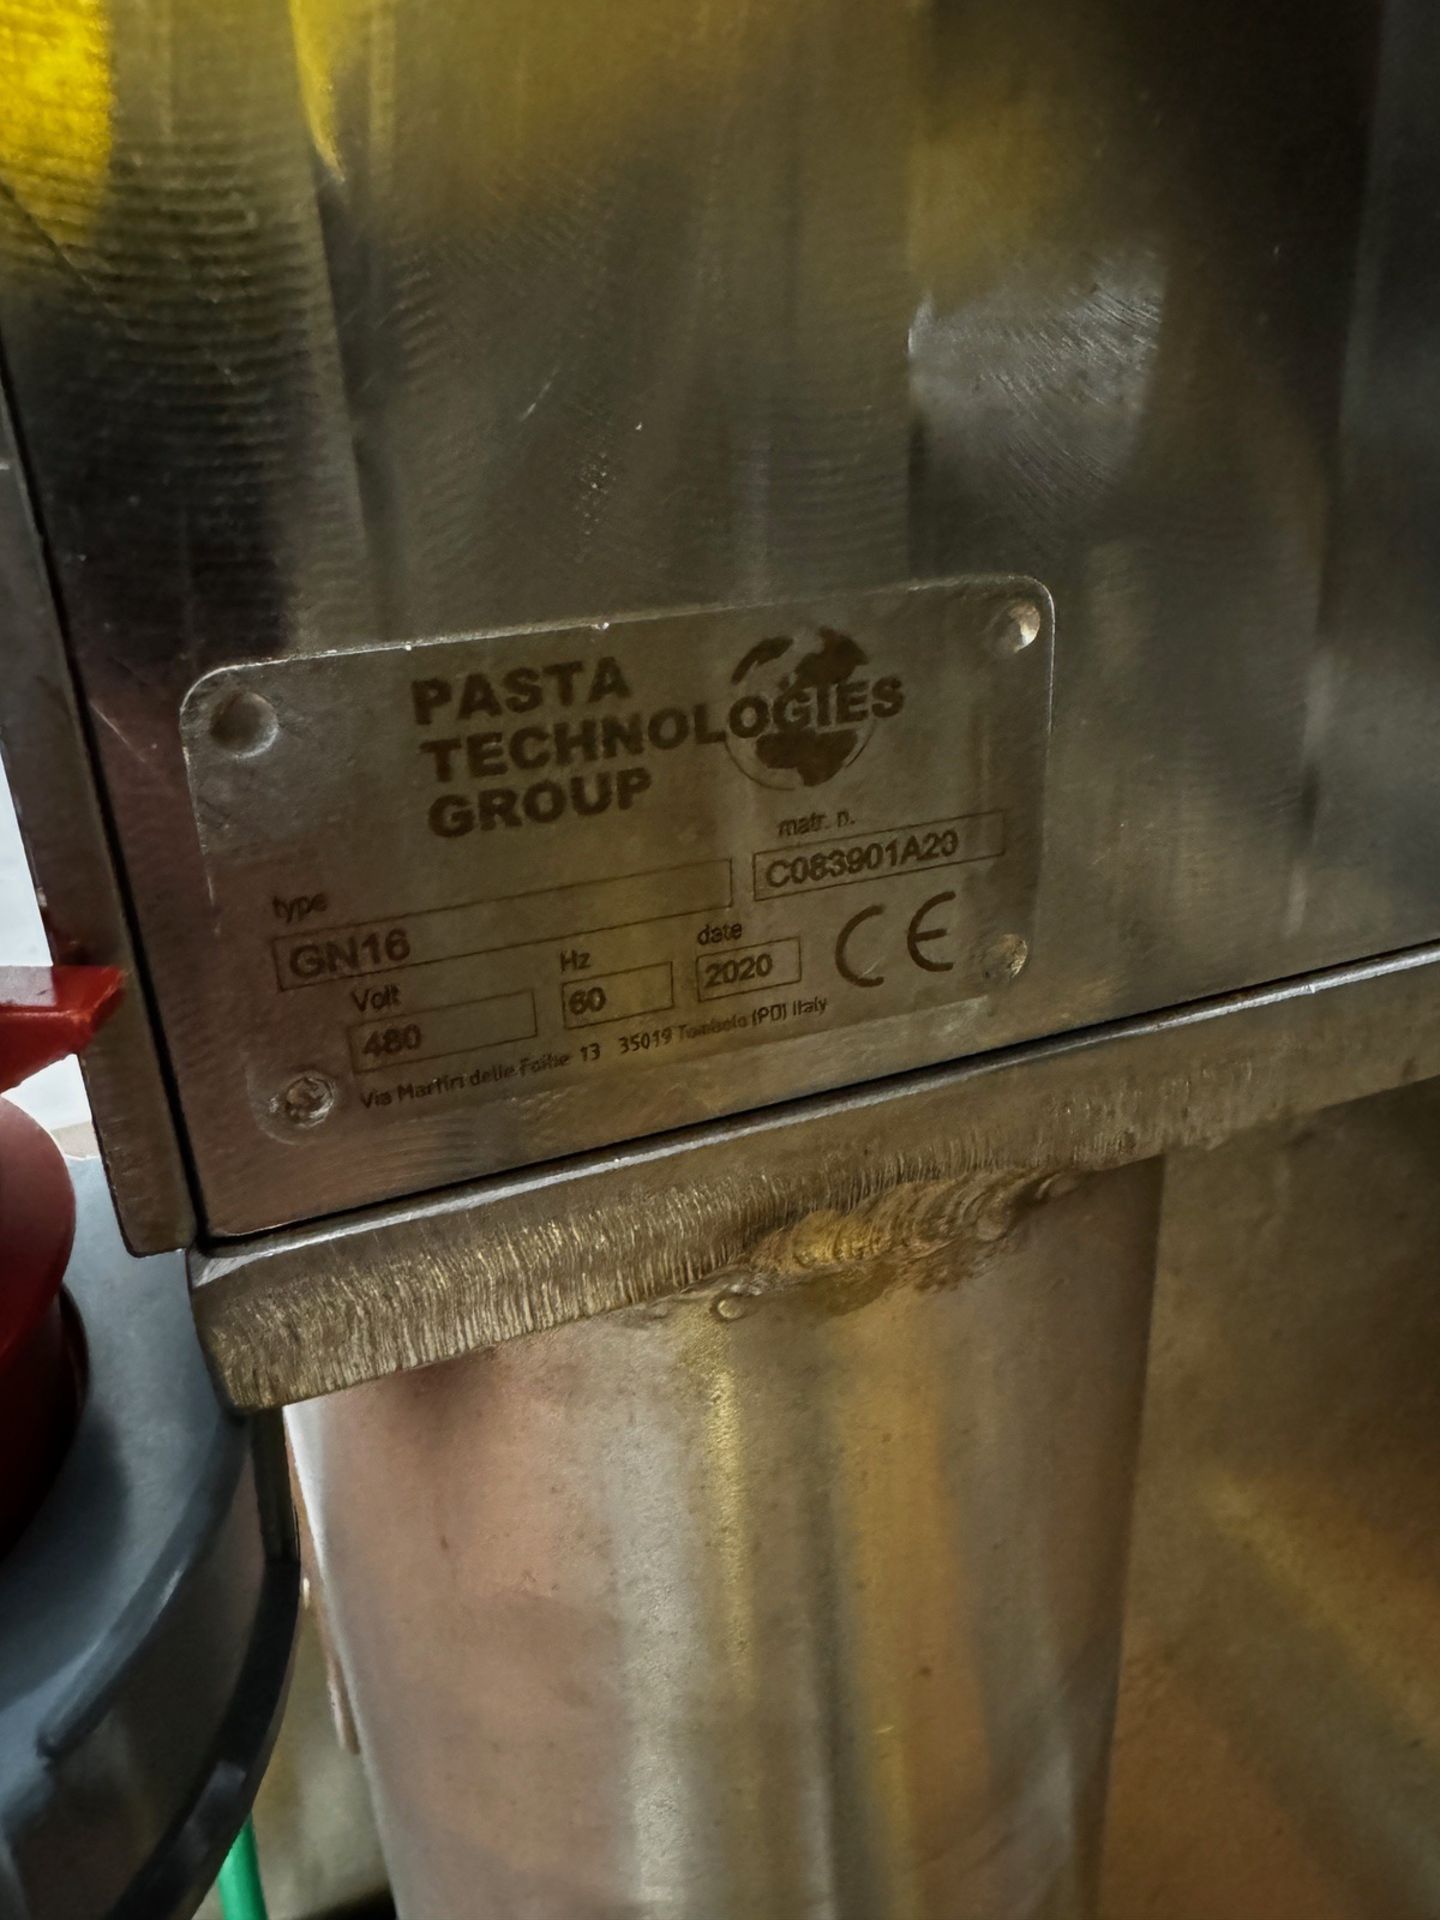 2020 Pasta Technologies GN16 Gnocchi Former & Vibratory Conveyor, S/N C083901A20 | Rig Fee $500 - Image 4 of 4